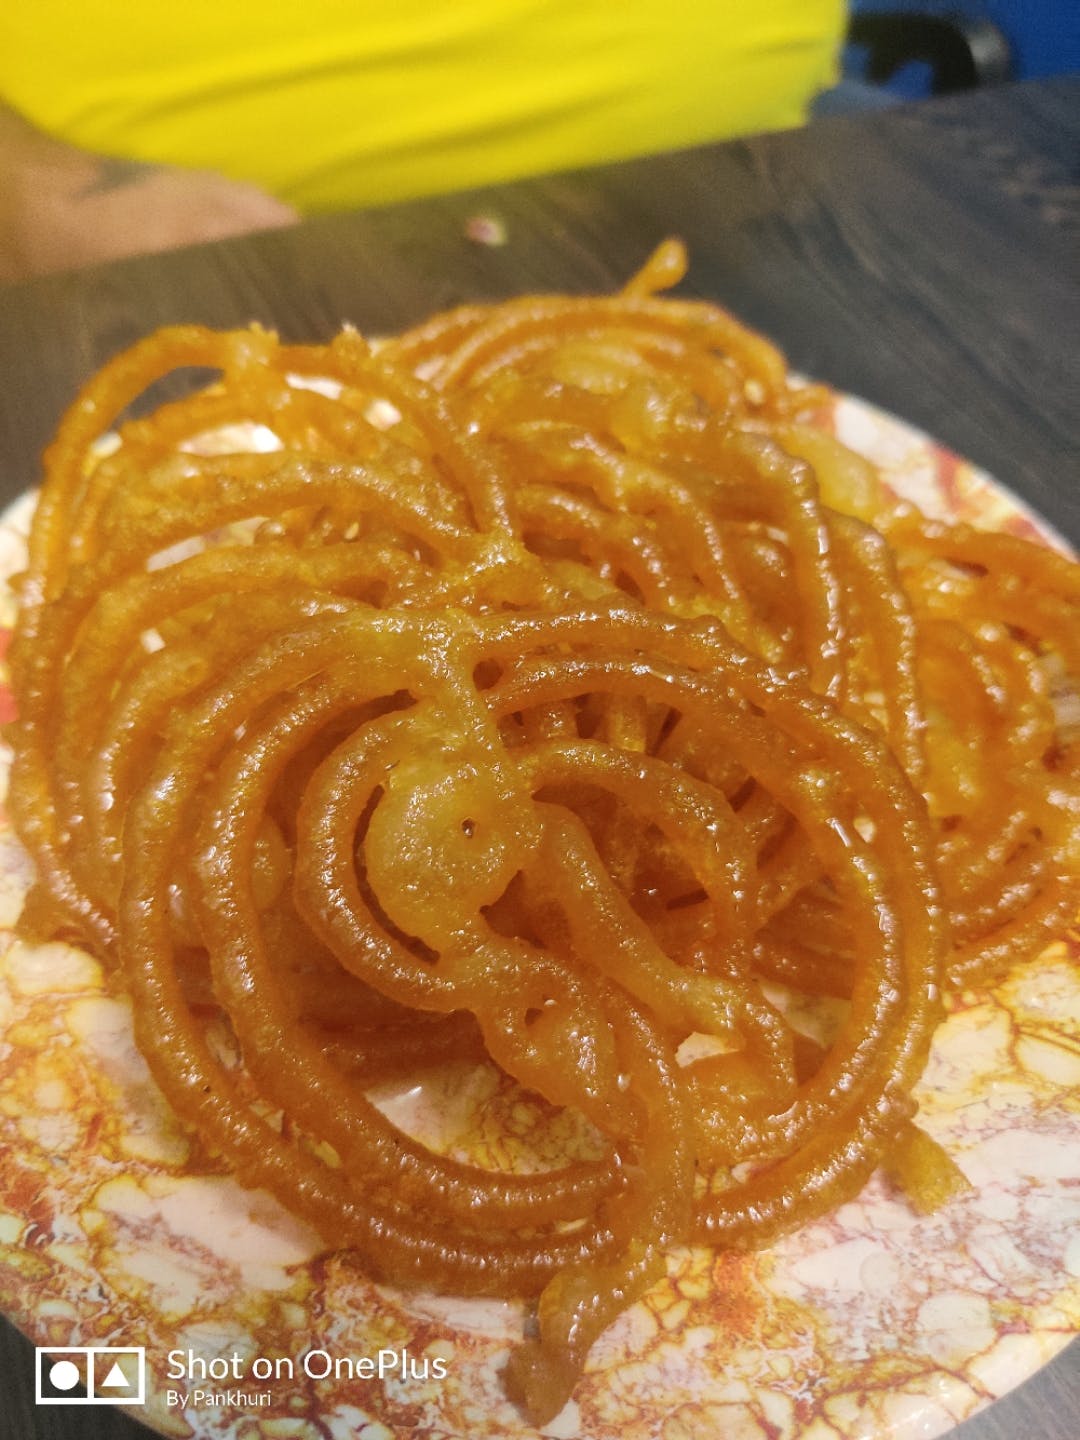 Food,Cuisine,Dish,Jalebi,Ingredient,South asian sweets,Dessert,Snack,Produce,Confectionery